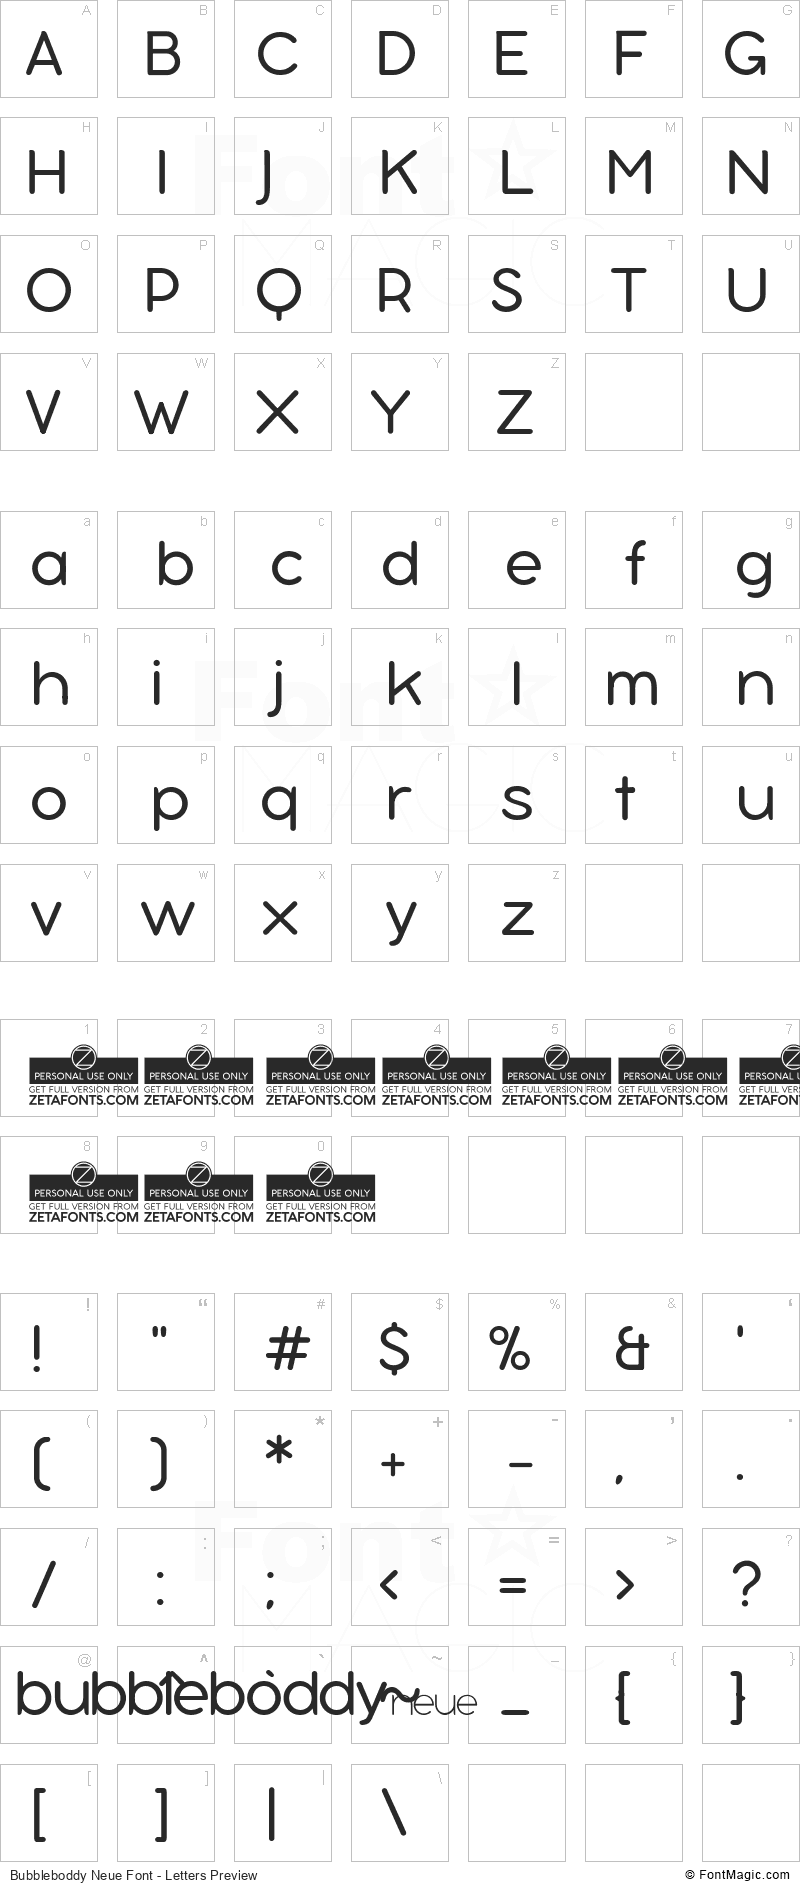 Bubbleboddy Neue Font - All Latters Preview Chart